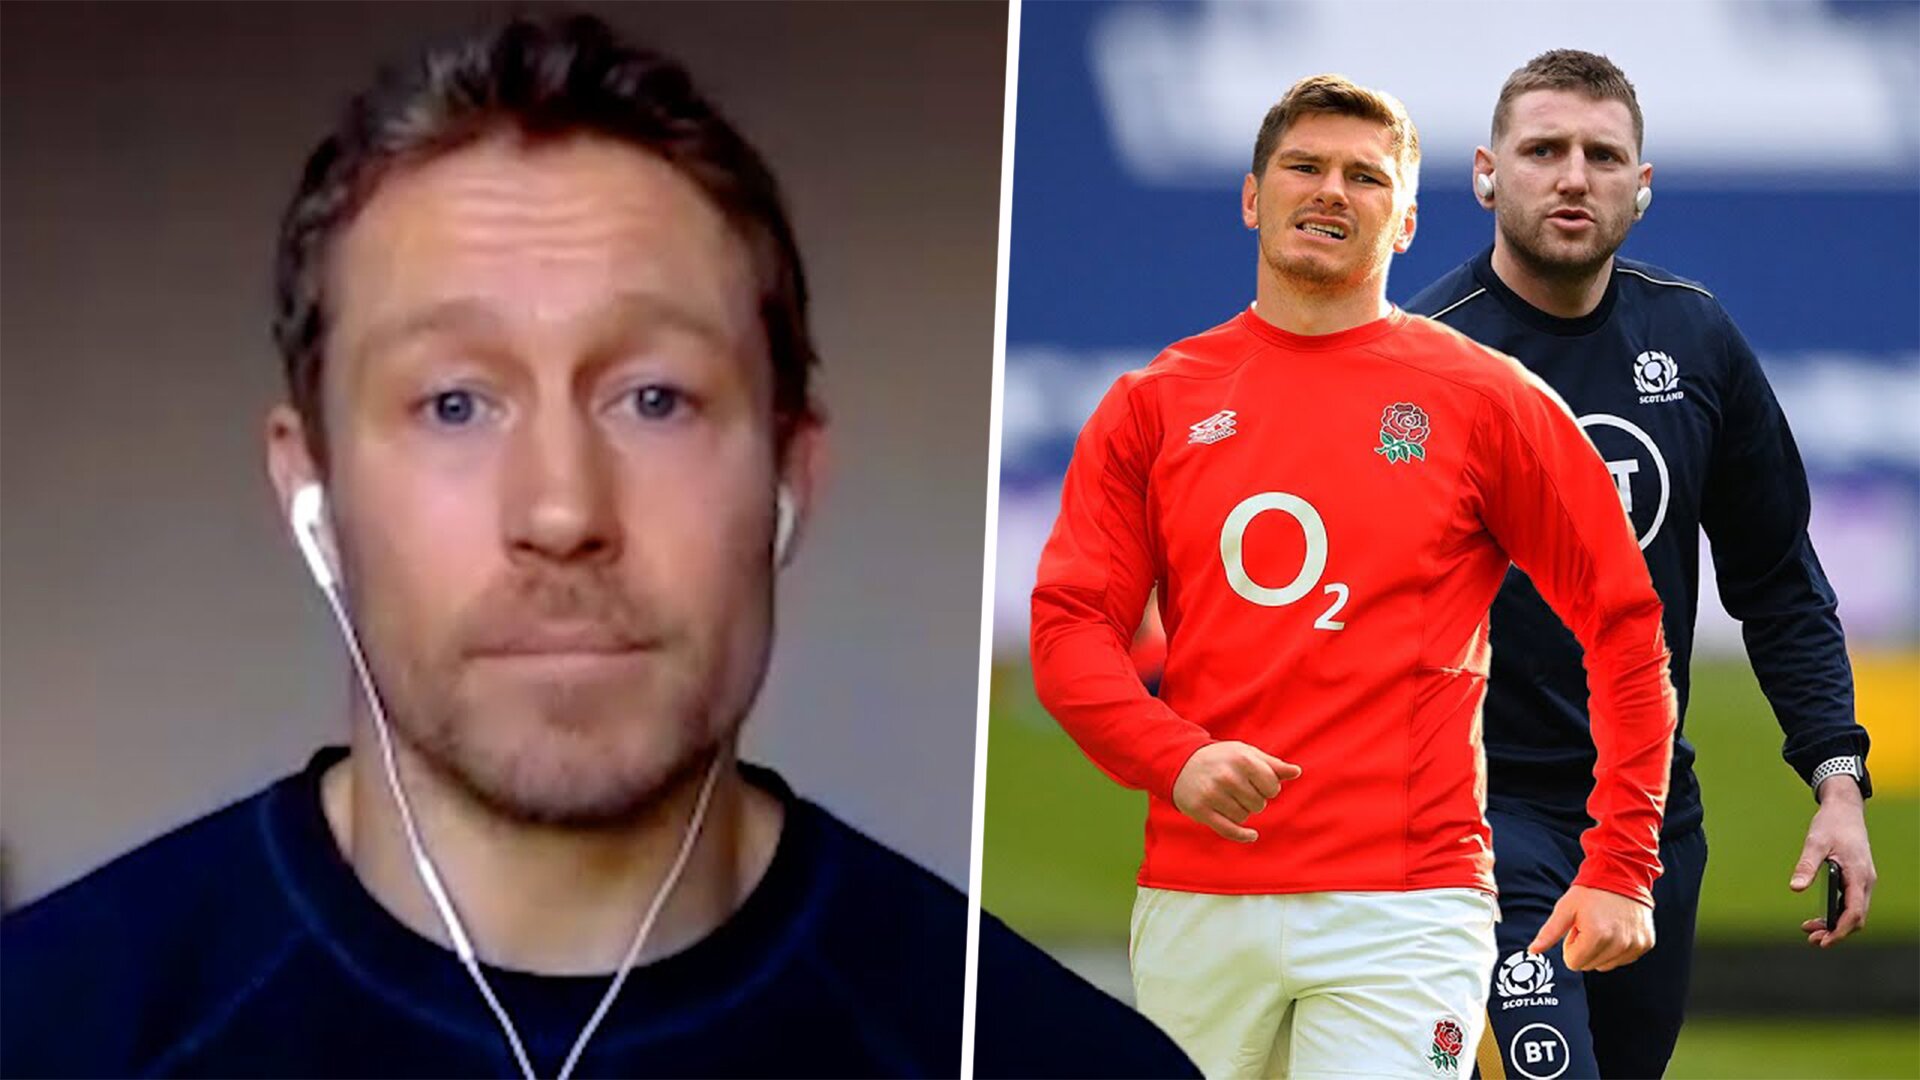 Jonny Wilkinson on who he would pick at 10 for the British & Irish Lions